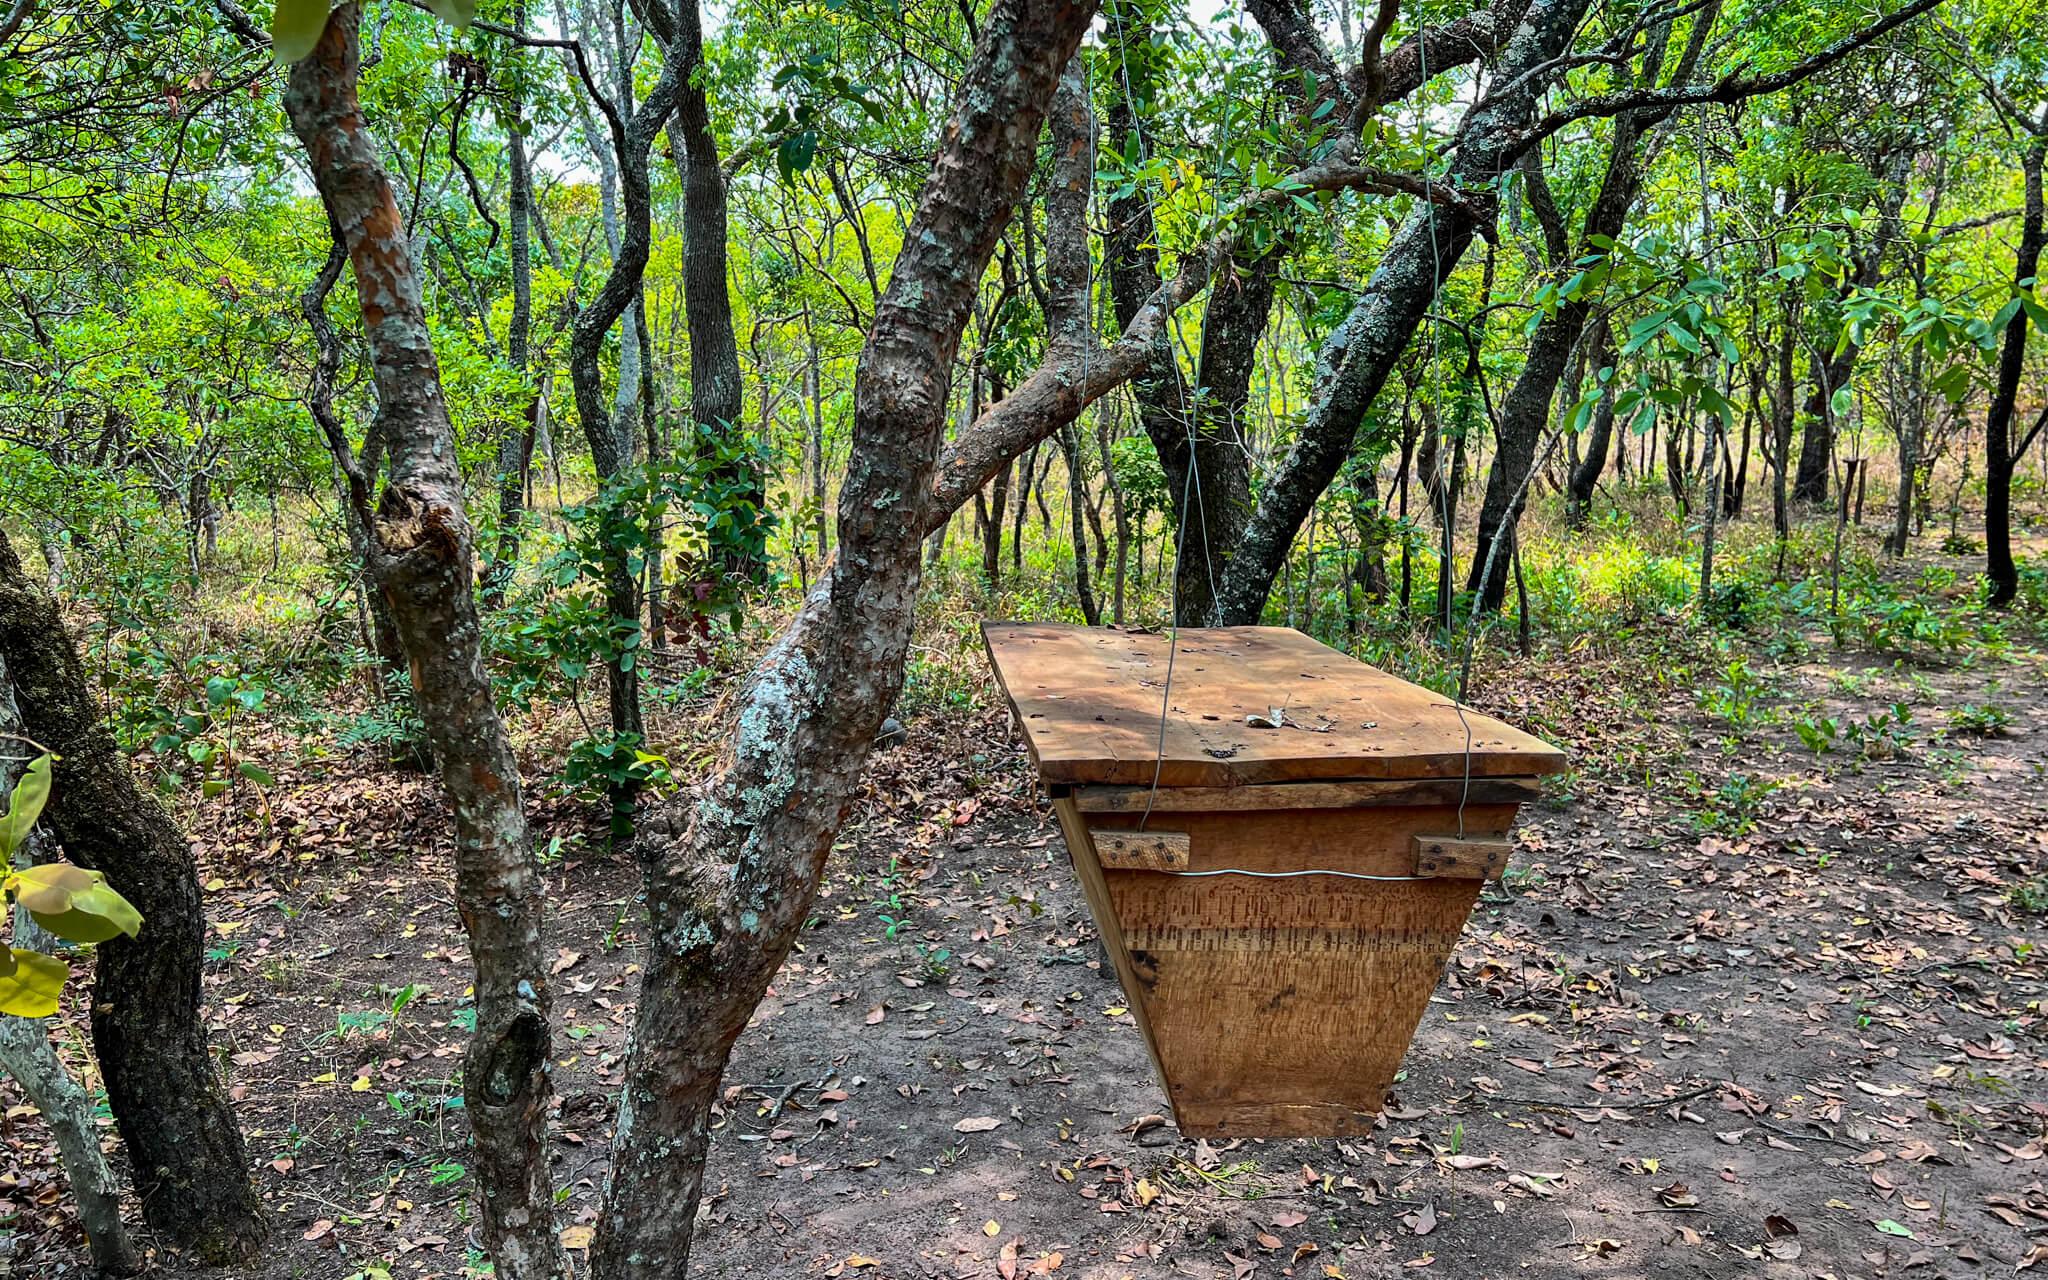 Traditional beekeeping methods vary around the world; in northwest Zambia, the use of tree hives is common.
Photo: Wuchi Wami